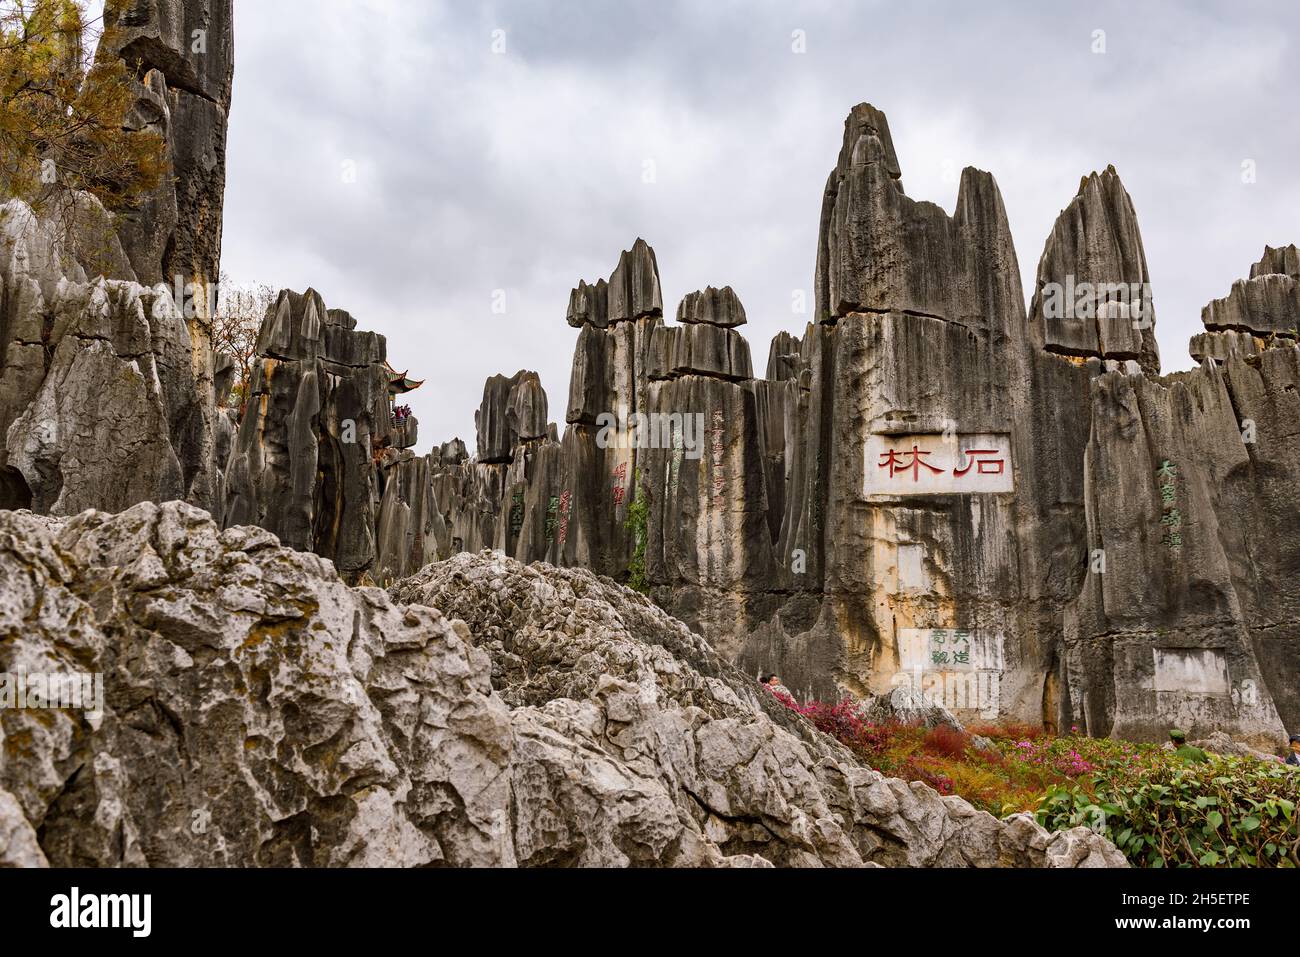 Yunnan, China - 27 March 2016: Shilin stone forest, a karst formation that happened millions of years ago. One of the most popular attractions in Yunn Stock Photo